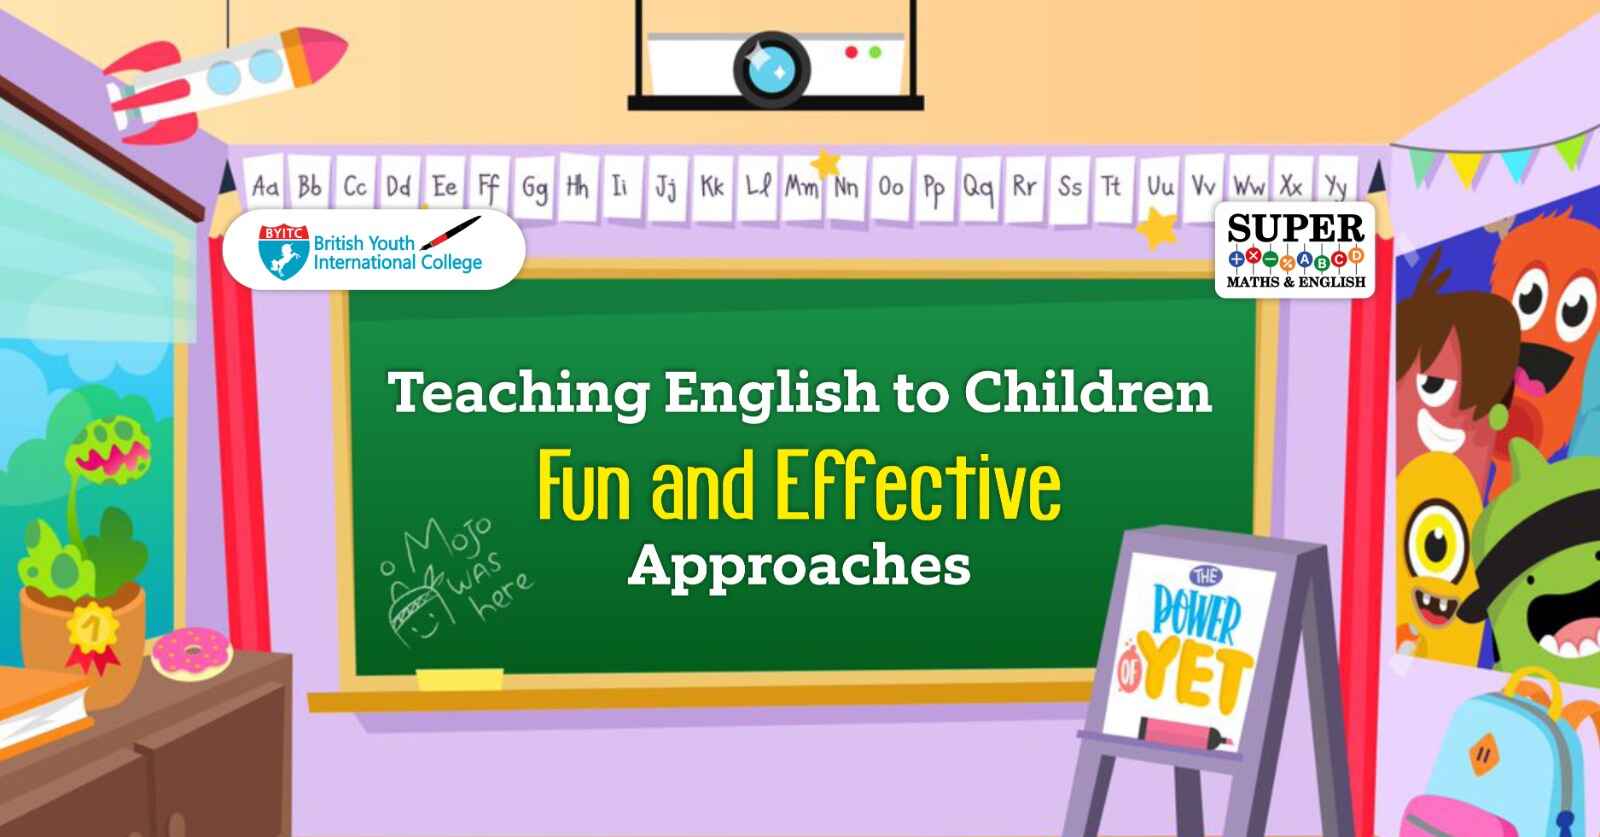 Teaching English to Children: Fun and Effective Approaches